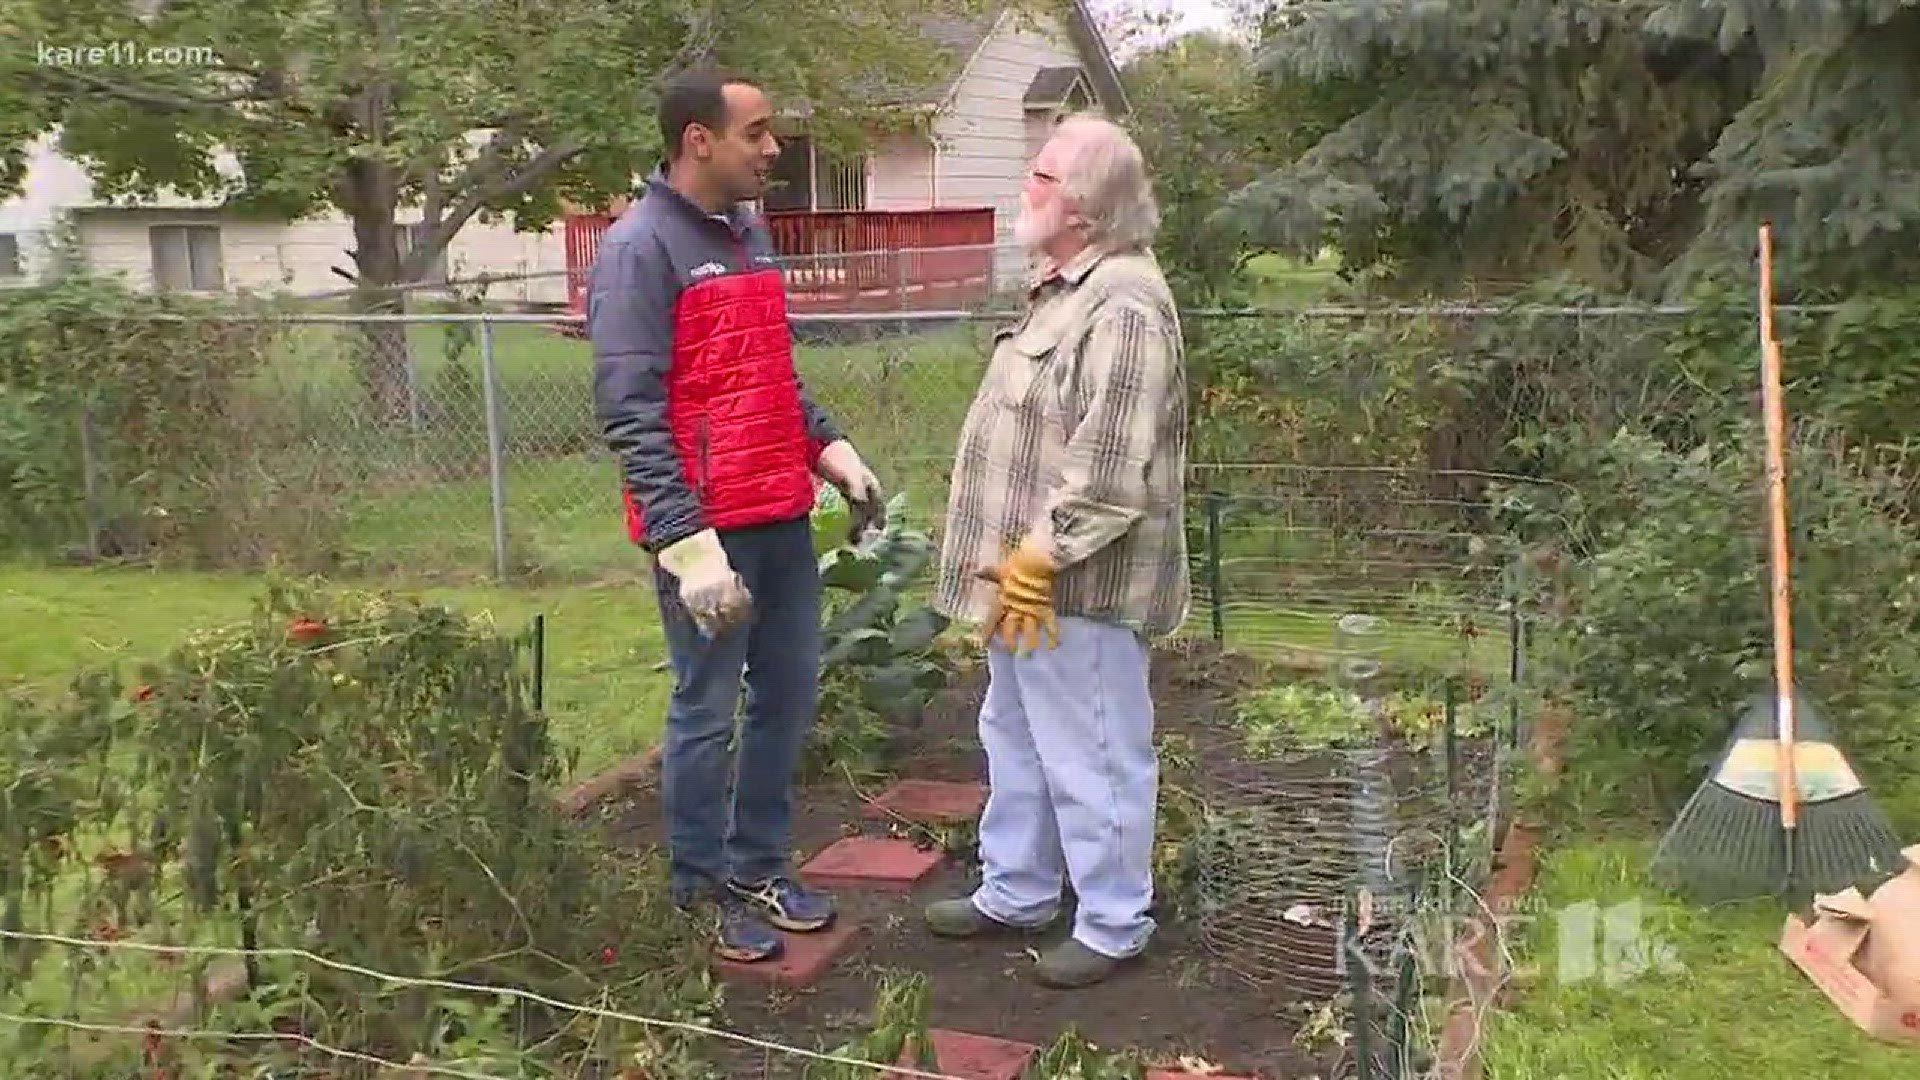 Jeff Edmondson bought his first house this past year and his first home garden. Bobby has been checking in with him throughout the year to see how it is going. http://kare11.tv/2yxGSmi